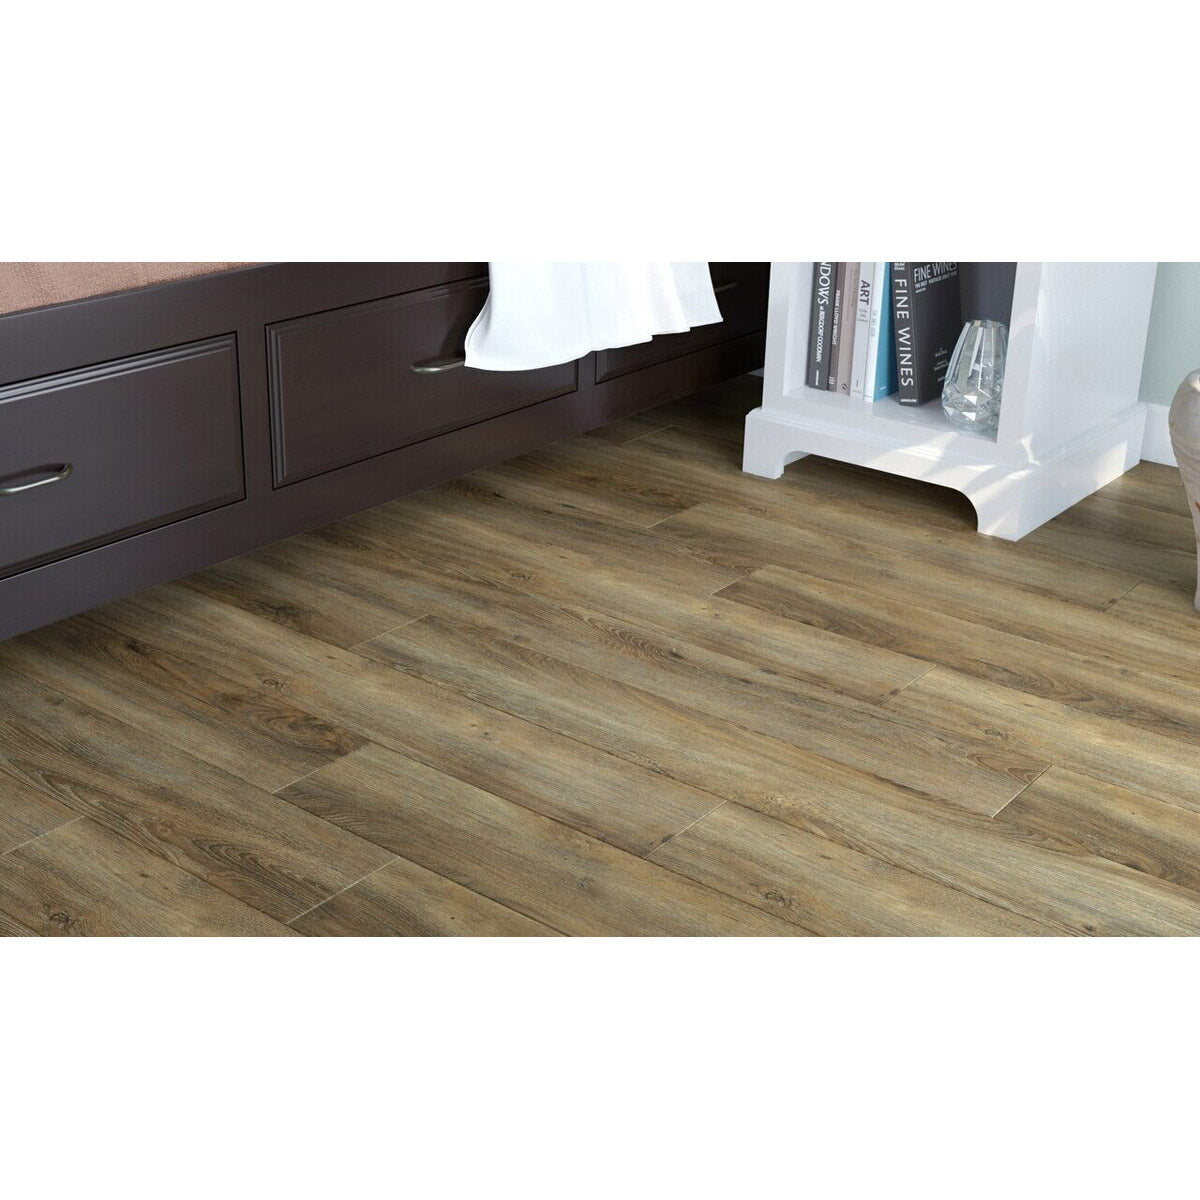 Engineered Floors - Gallatin Collection - 7 in. x 48 in. - Bay of Plenty Installed